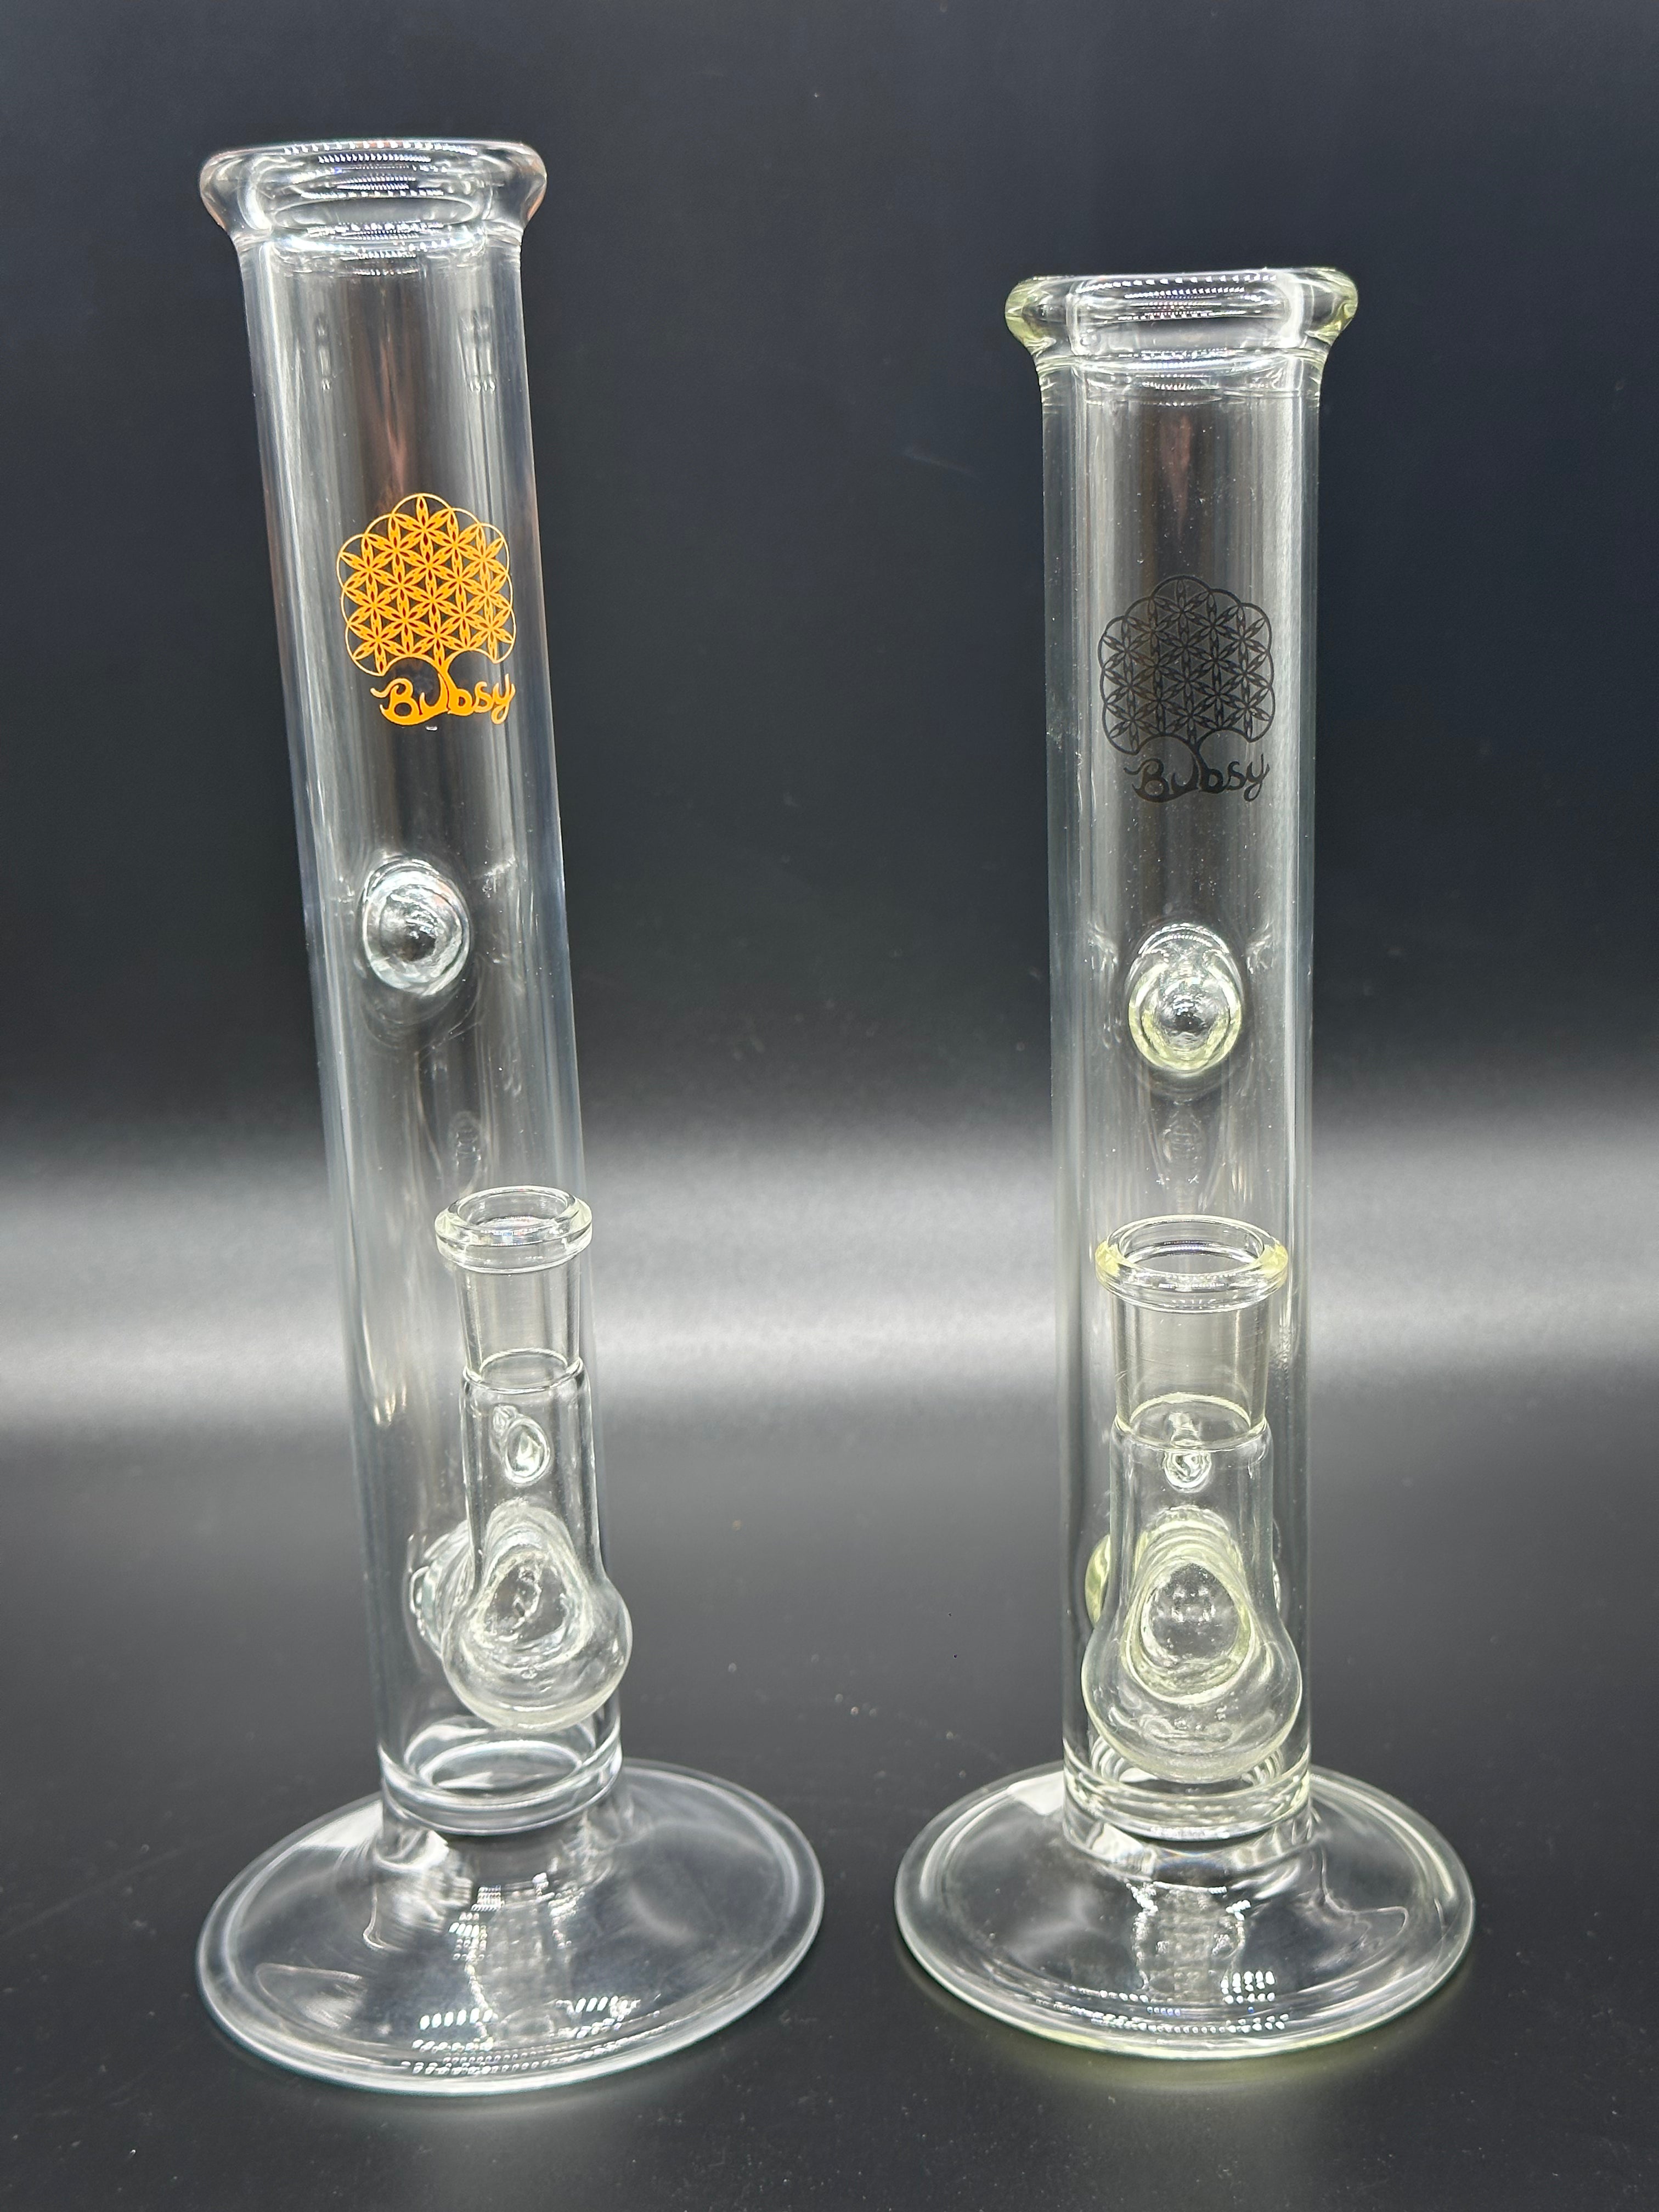 Bubsy Clear Inline Straight Tube